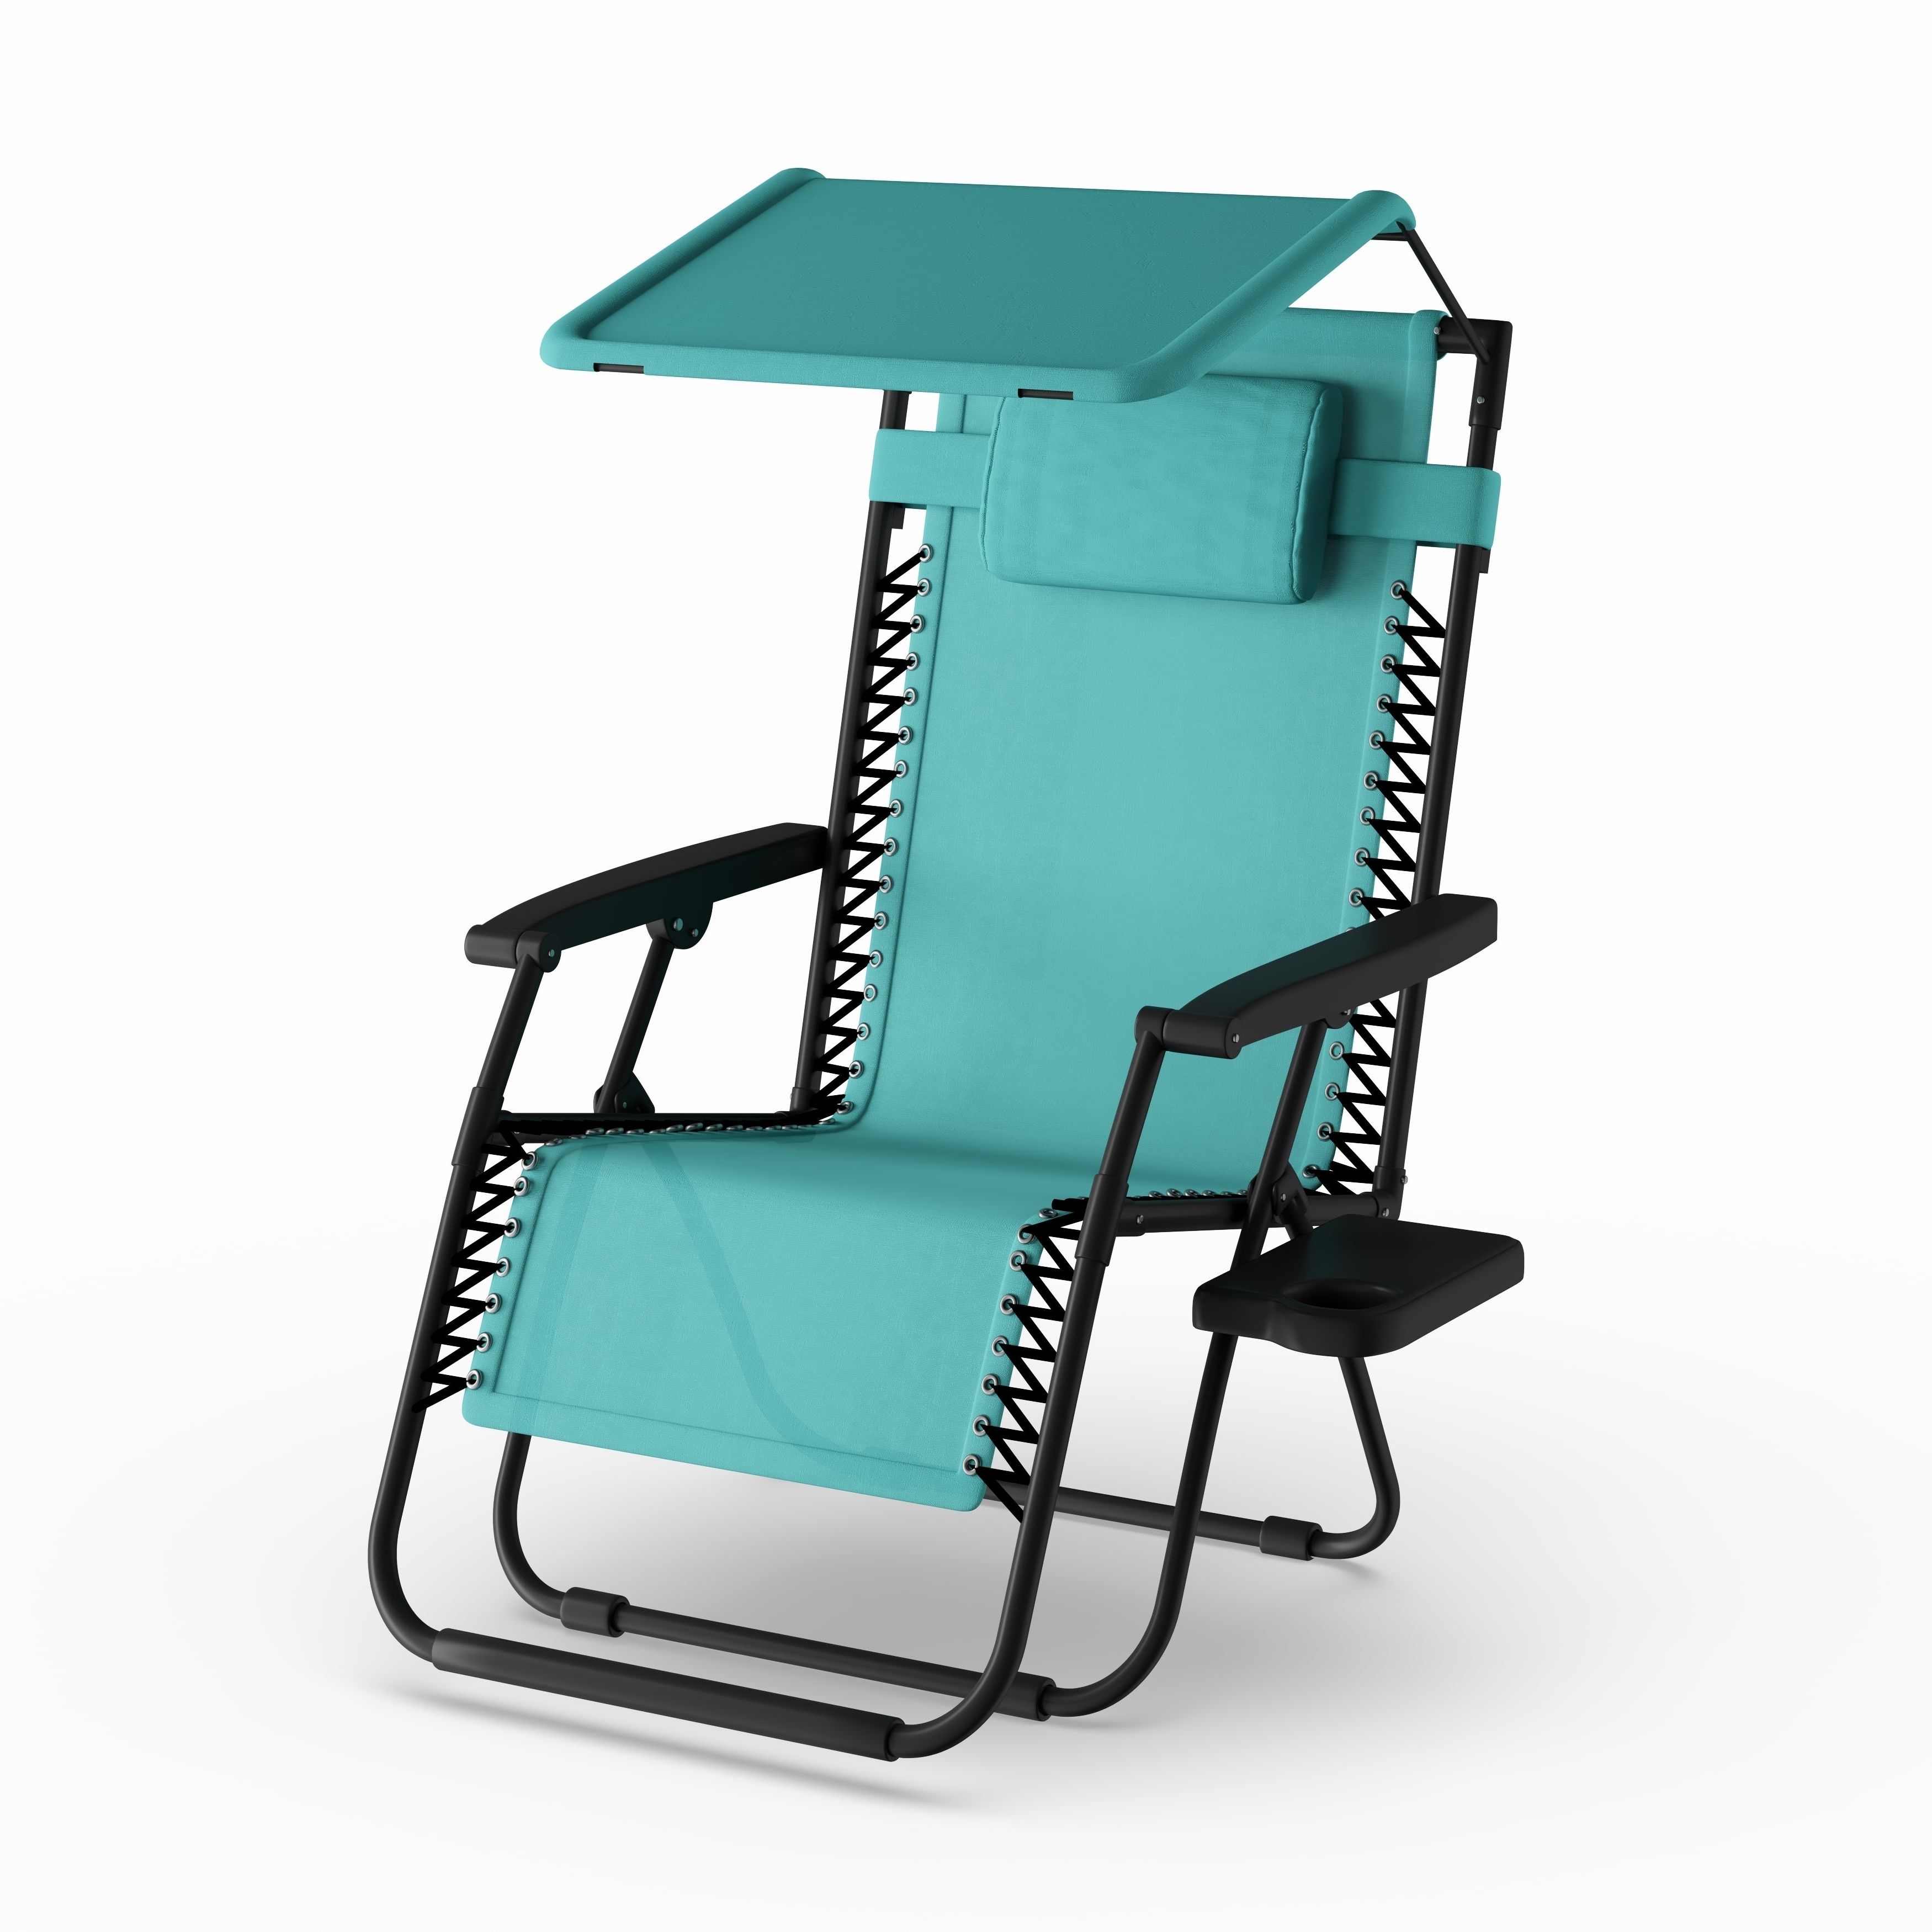 Most Up To Date Havenside Home Garden City Oversized Zero Gravity Chair With Sunshade And  Drink Tray Intended For Garden Oversized Chairs With Sunshade And Drink Tray (View 1 of 25)